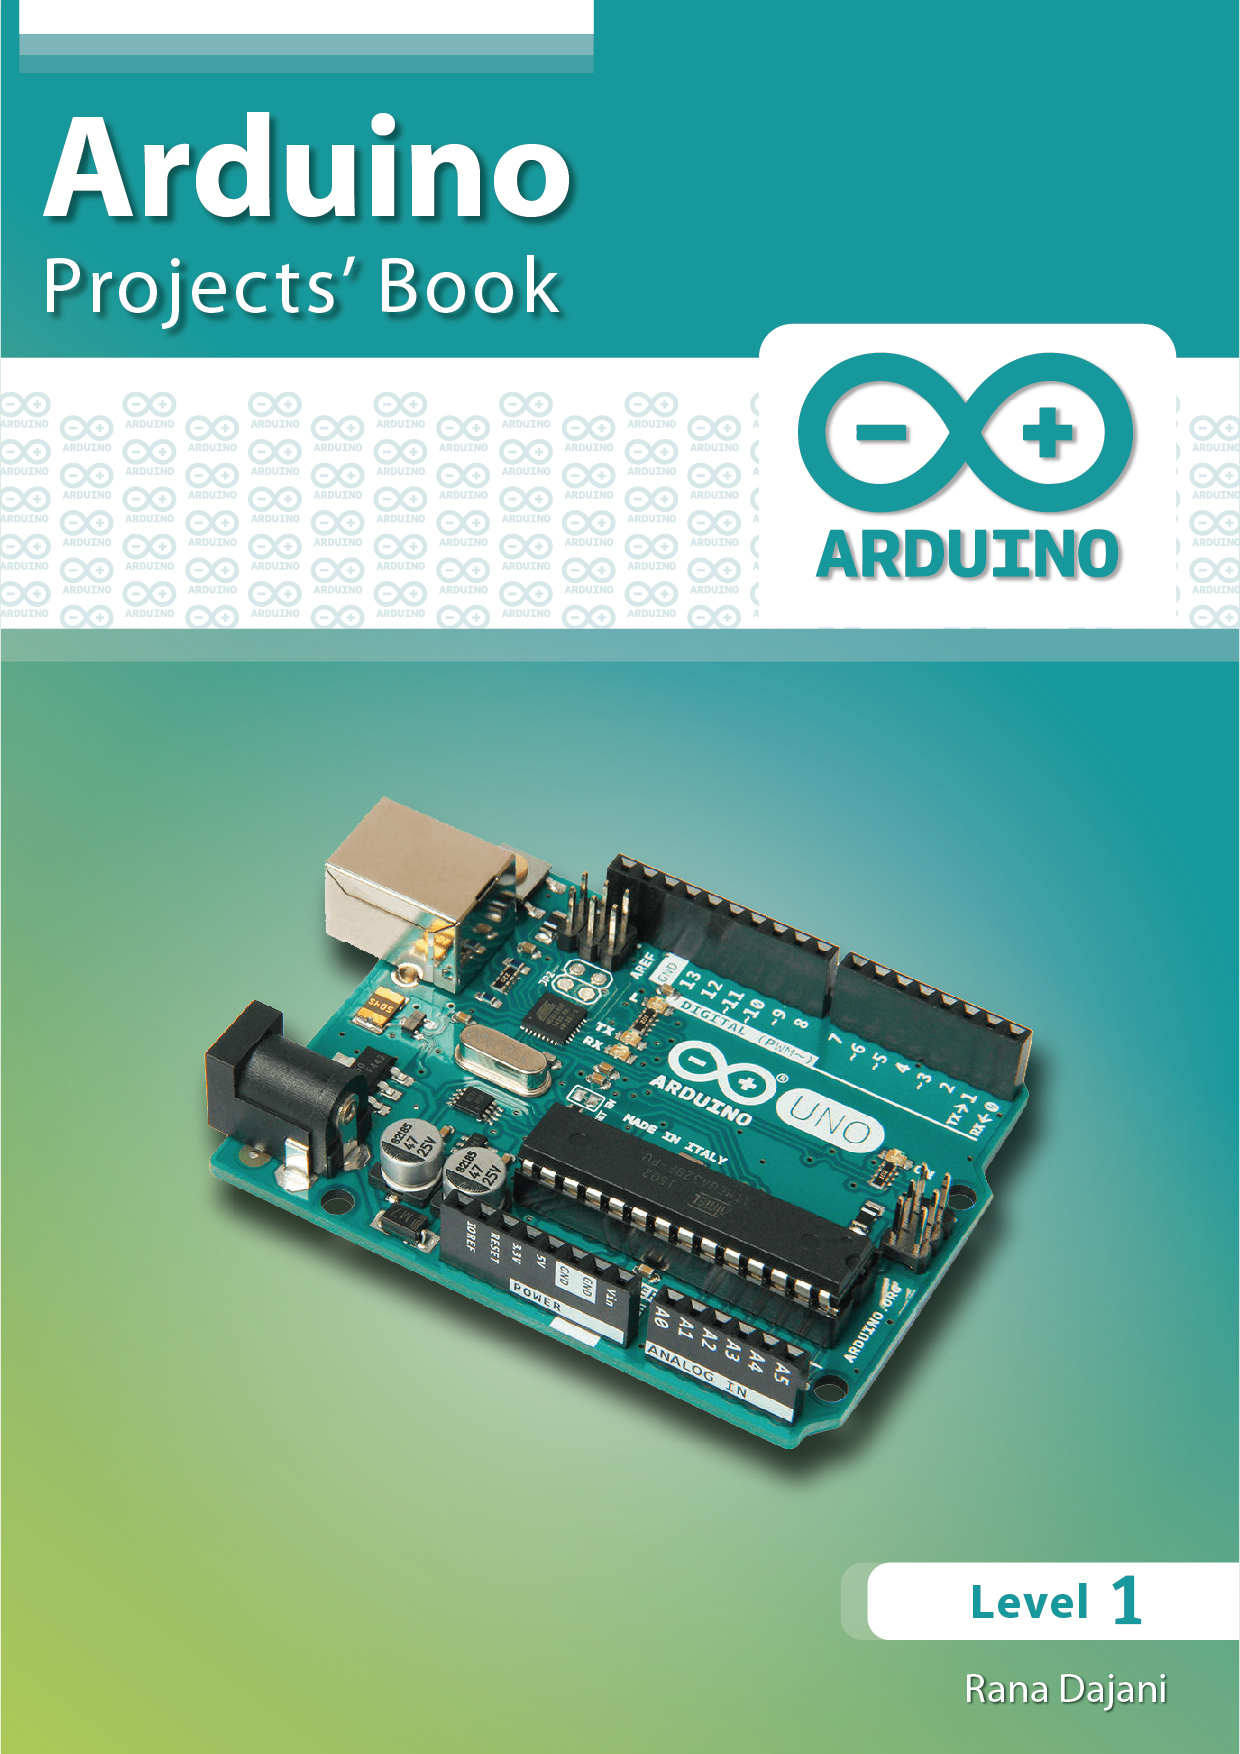 Arduino Projects Book - Level 1